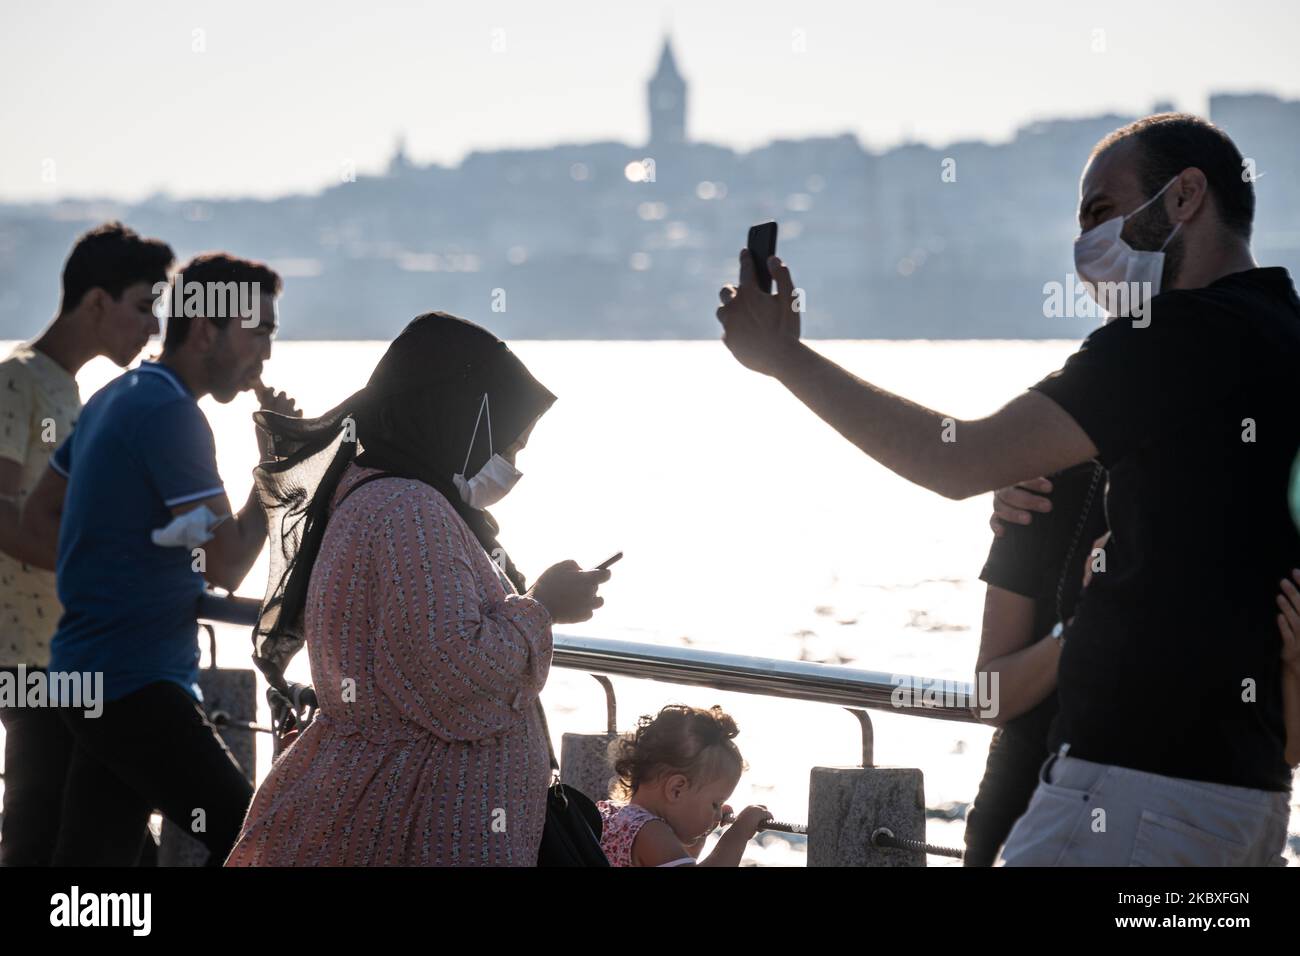 On 23 August, 2020, citizens of Turkey's largest city, Istanbul, on August 24, 2020, went about leisure activities on a Sunday afternoon and pursued daily routines while wearing face masks, as required by the Turkish government to reduce the spread of Covid-19. Pictured above, pedestrians take selfies while wearing face masks in Uskudar, Istanbul. (Photo by Diego Cupolo/NurPhoto) Stock Photo